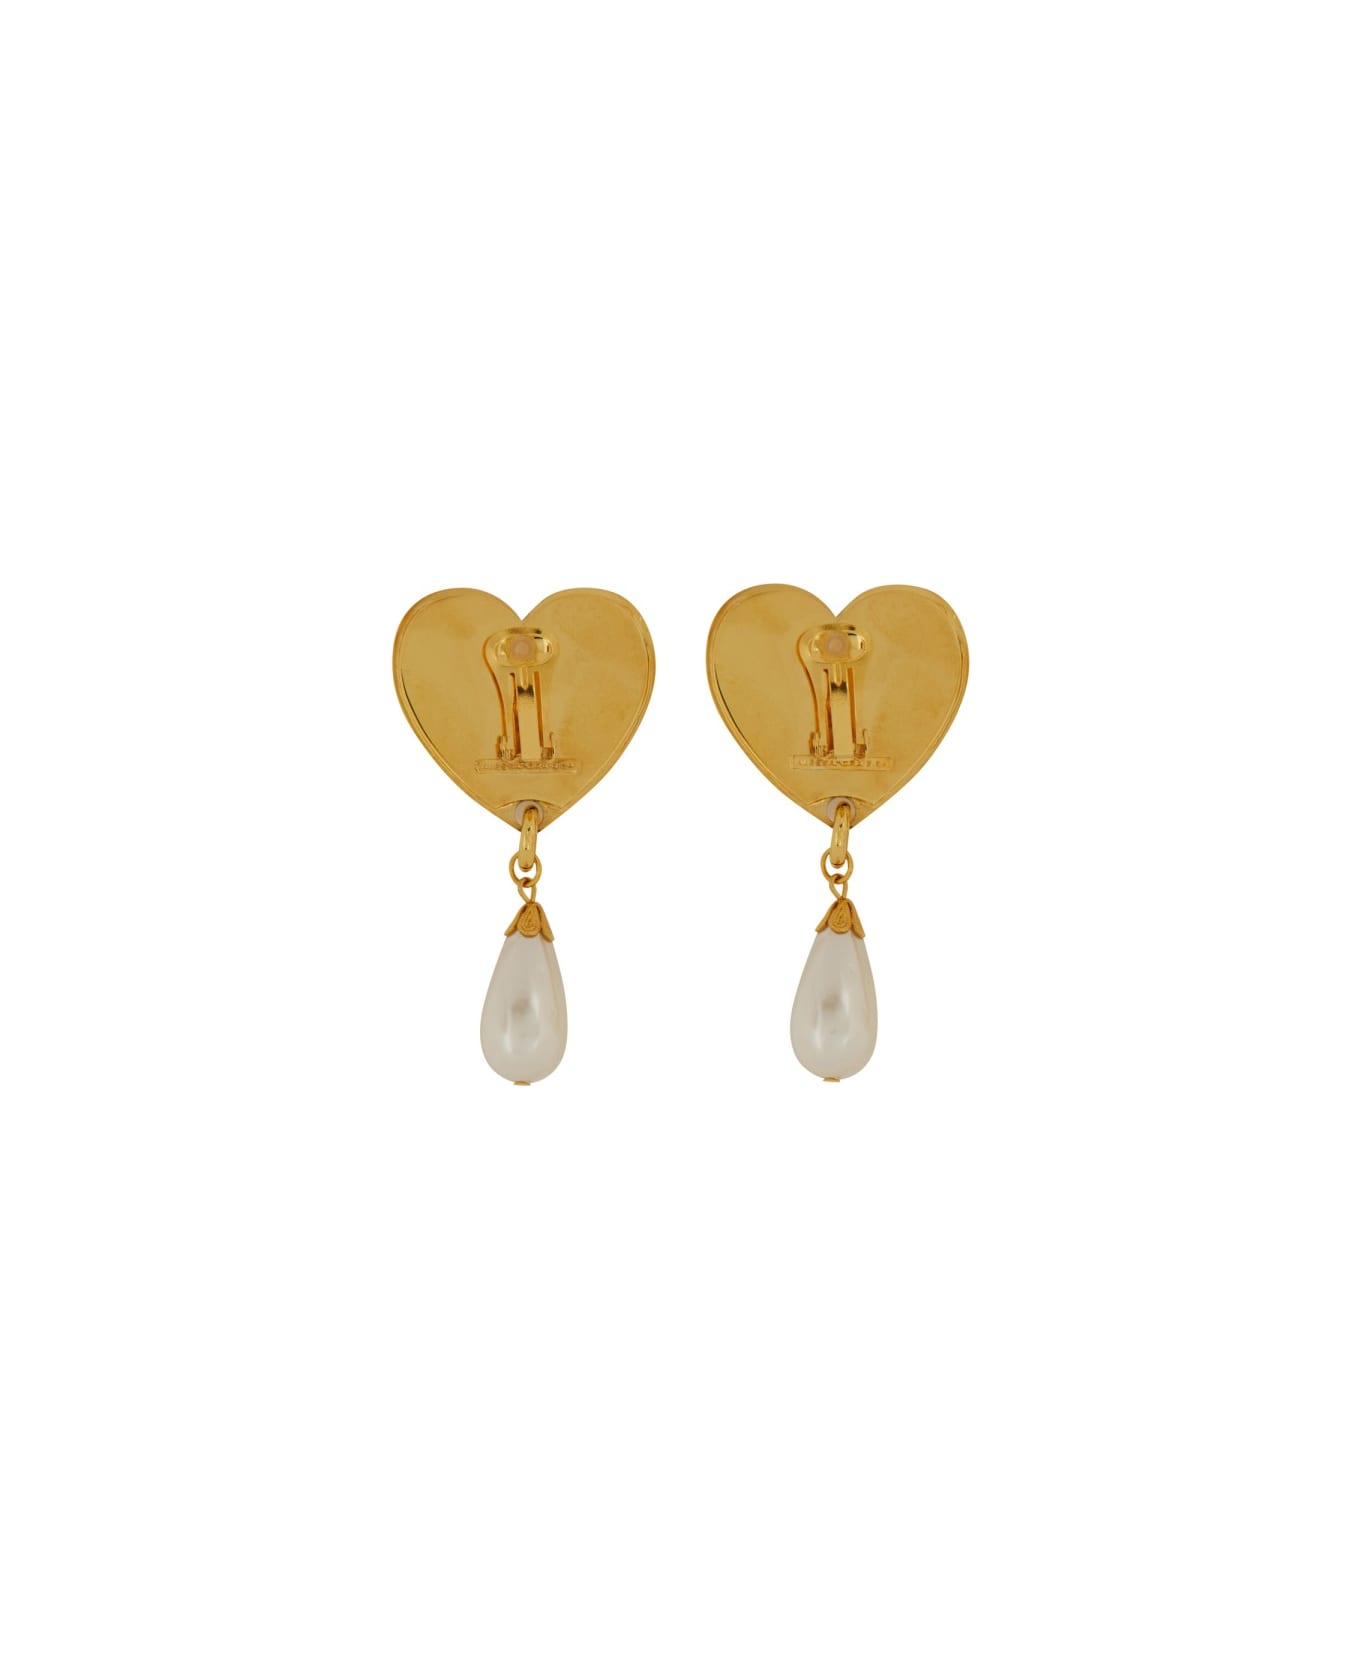 Alessandra Rich Metal Heart Earrings With Crystals - Cry gold